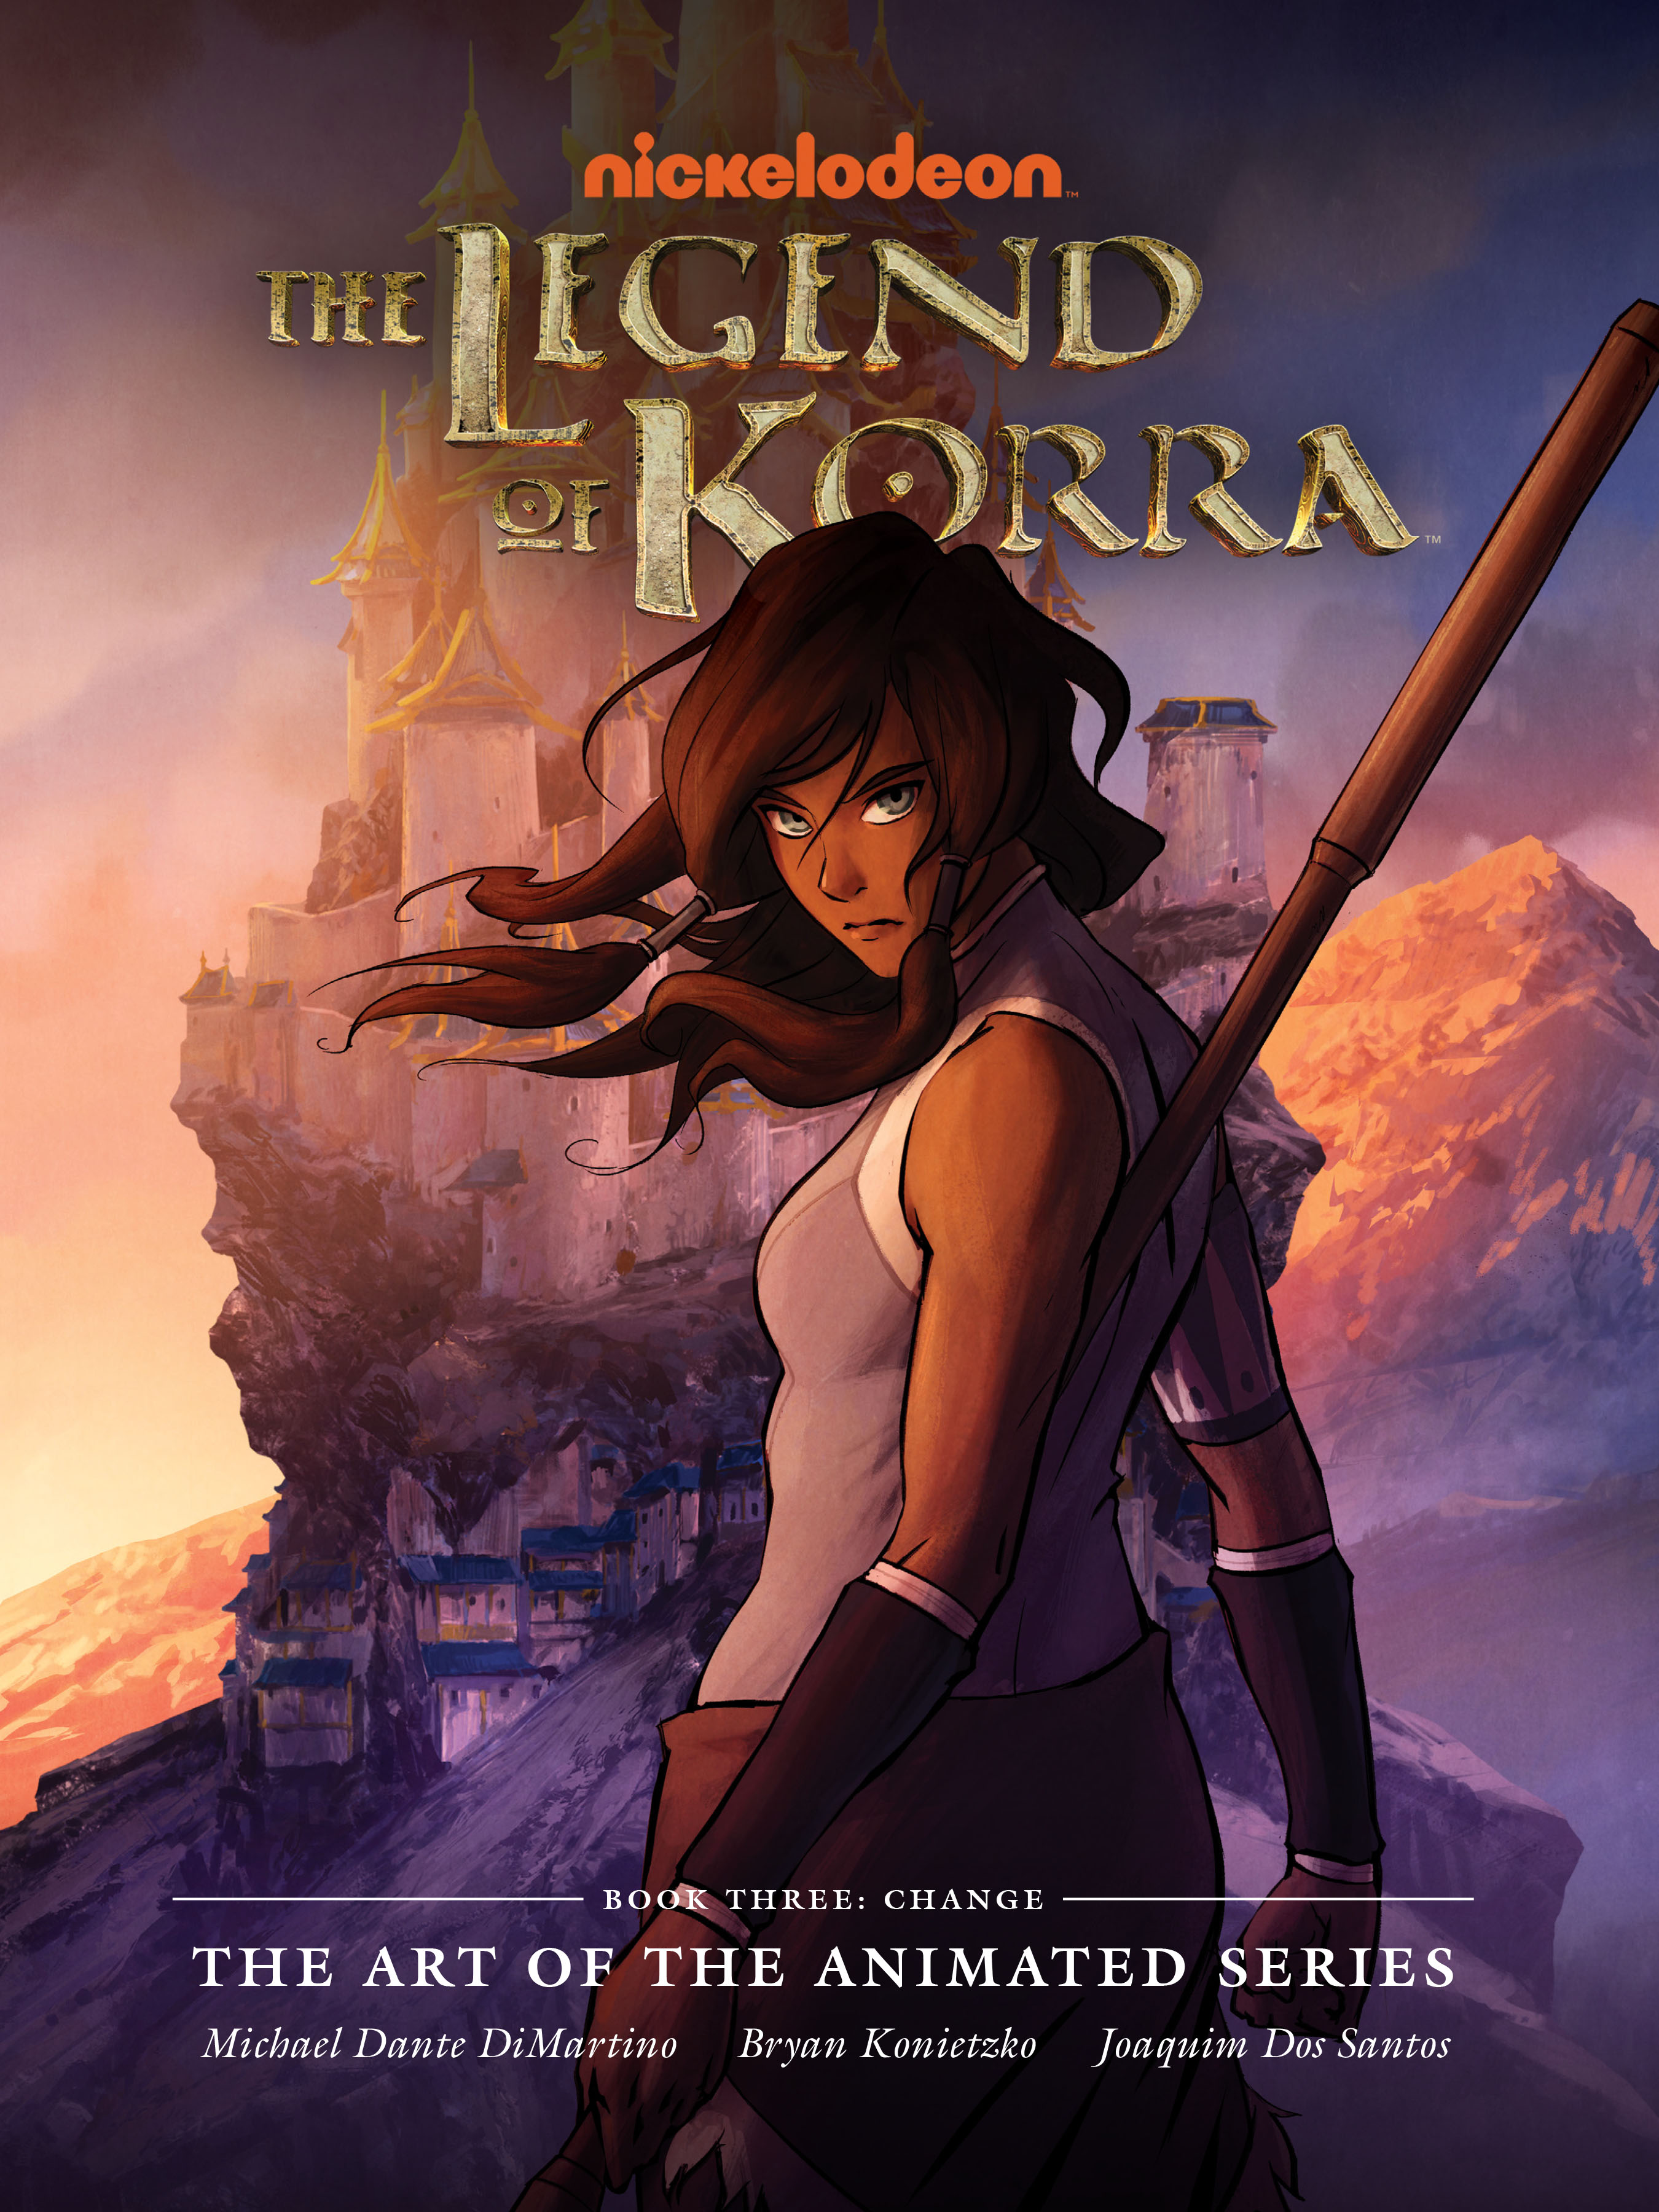 Read online The Legend of Korra: The Art of the Animated Series comic -  Issue # TPB 3 - 1